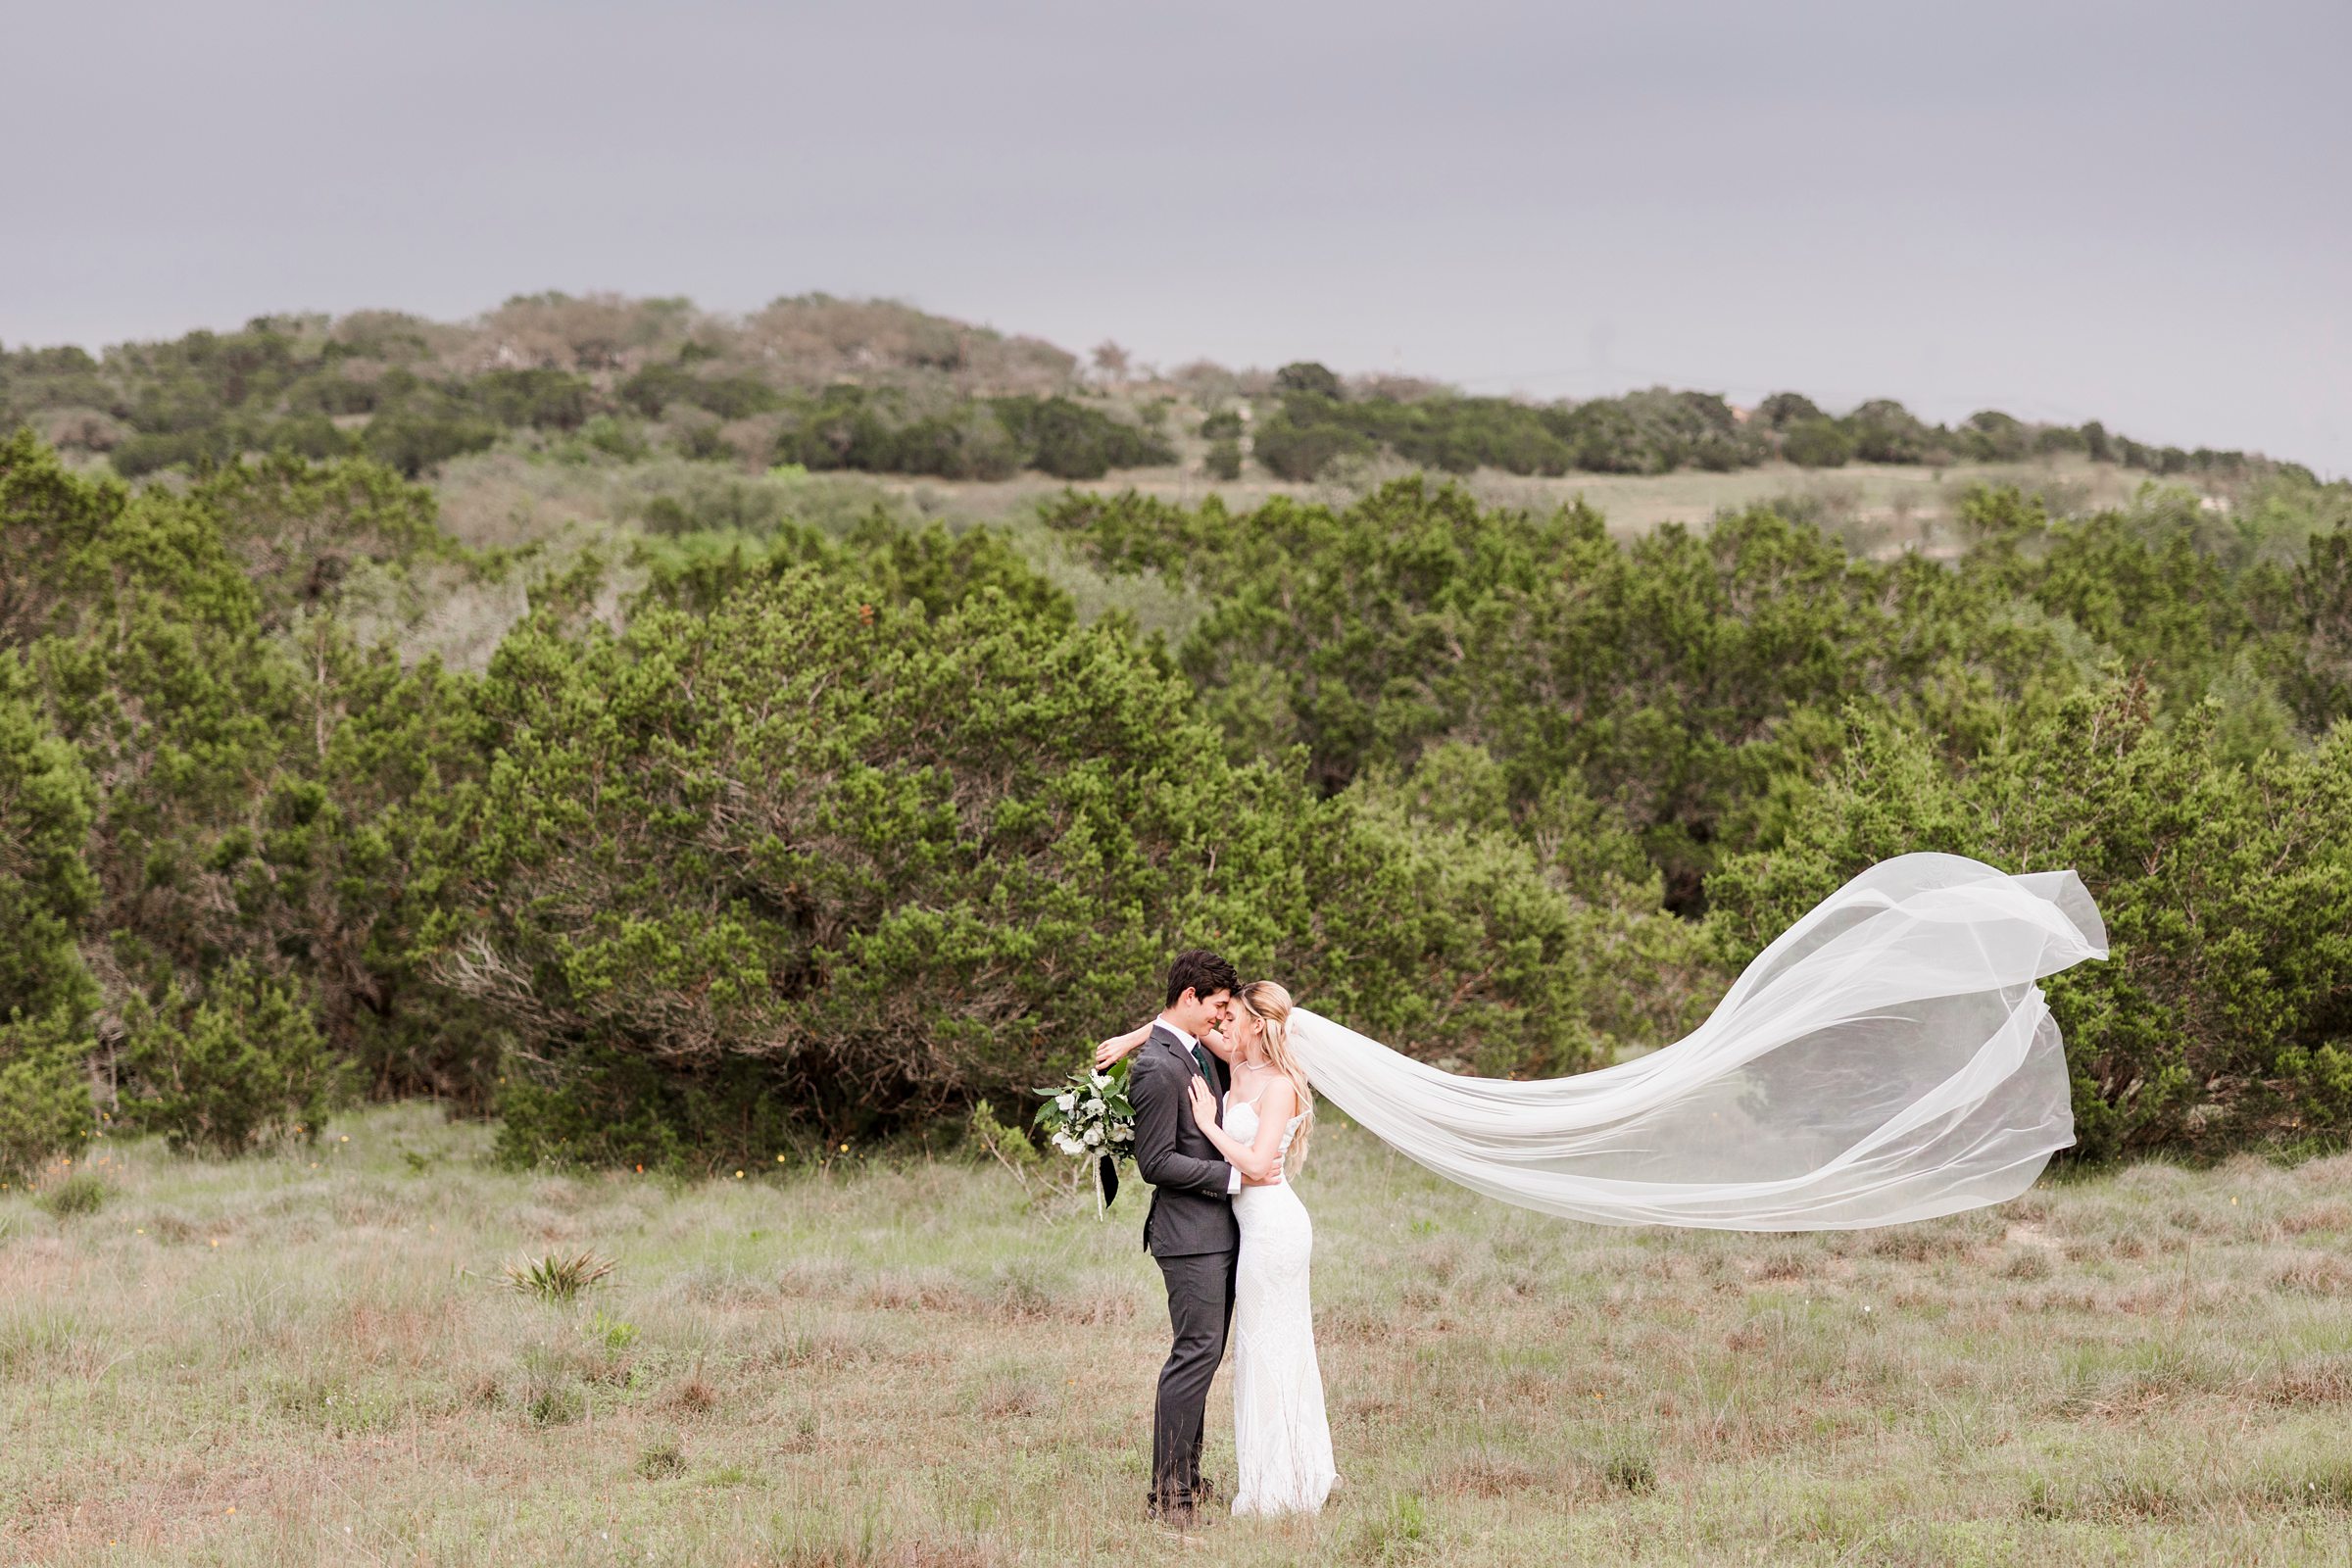 Bride and groom embrace during their wedding at the Terrace Club in Dripping Springs, Texas.